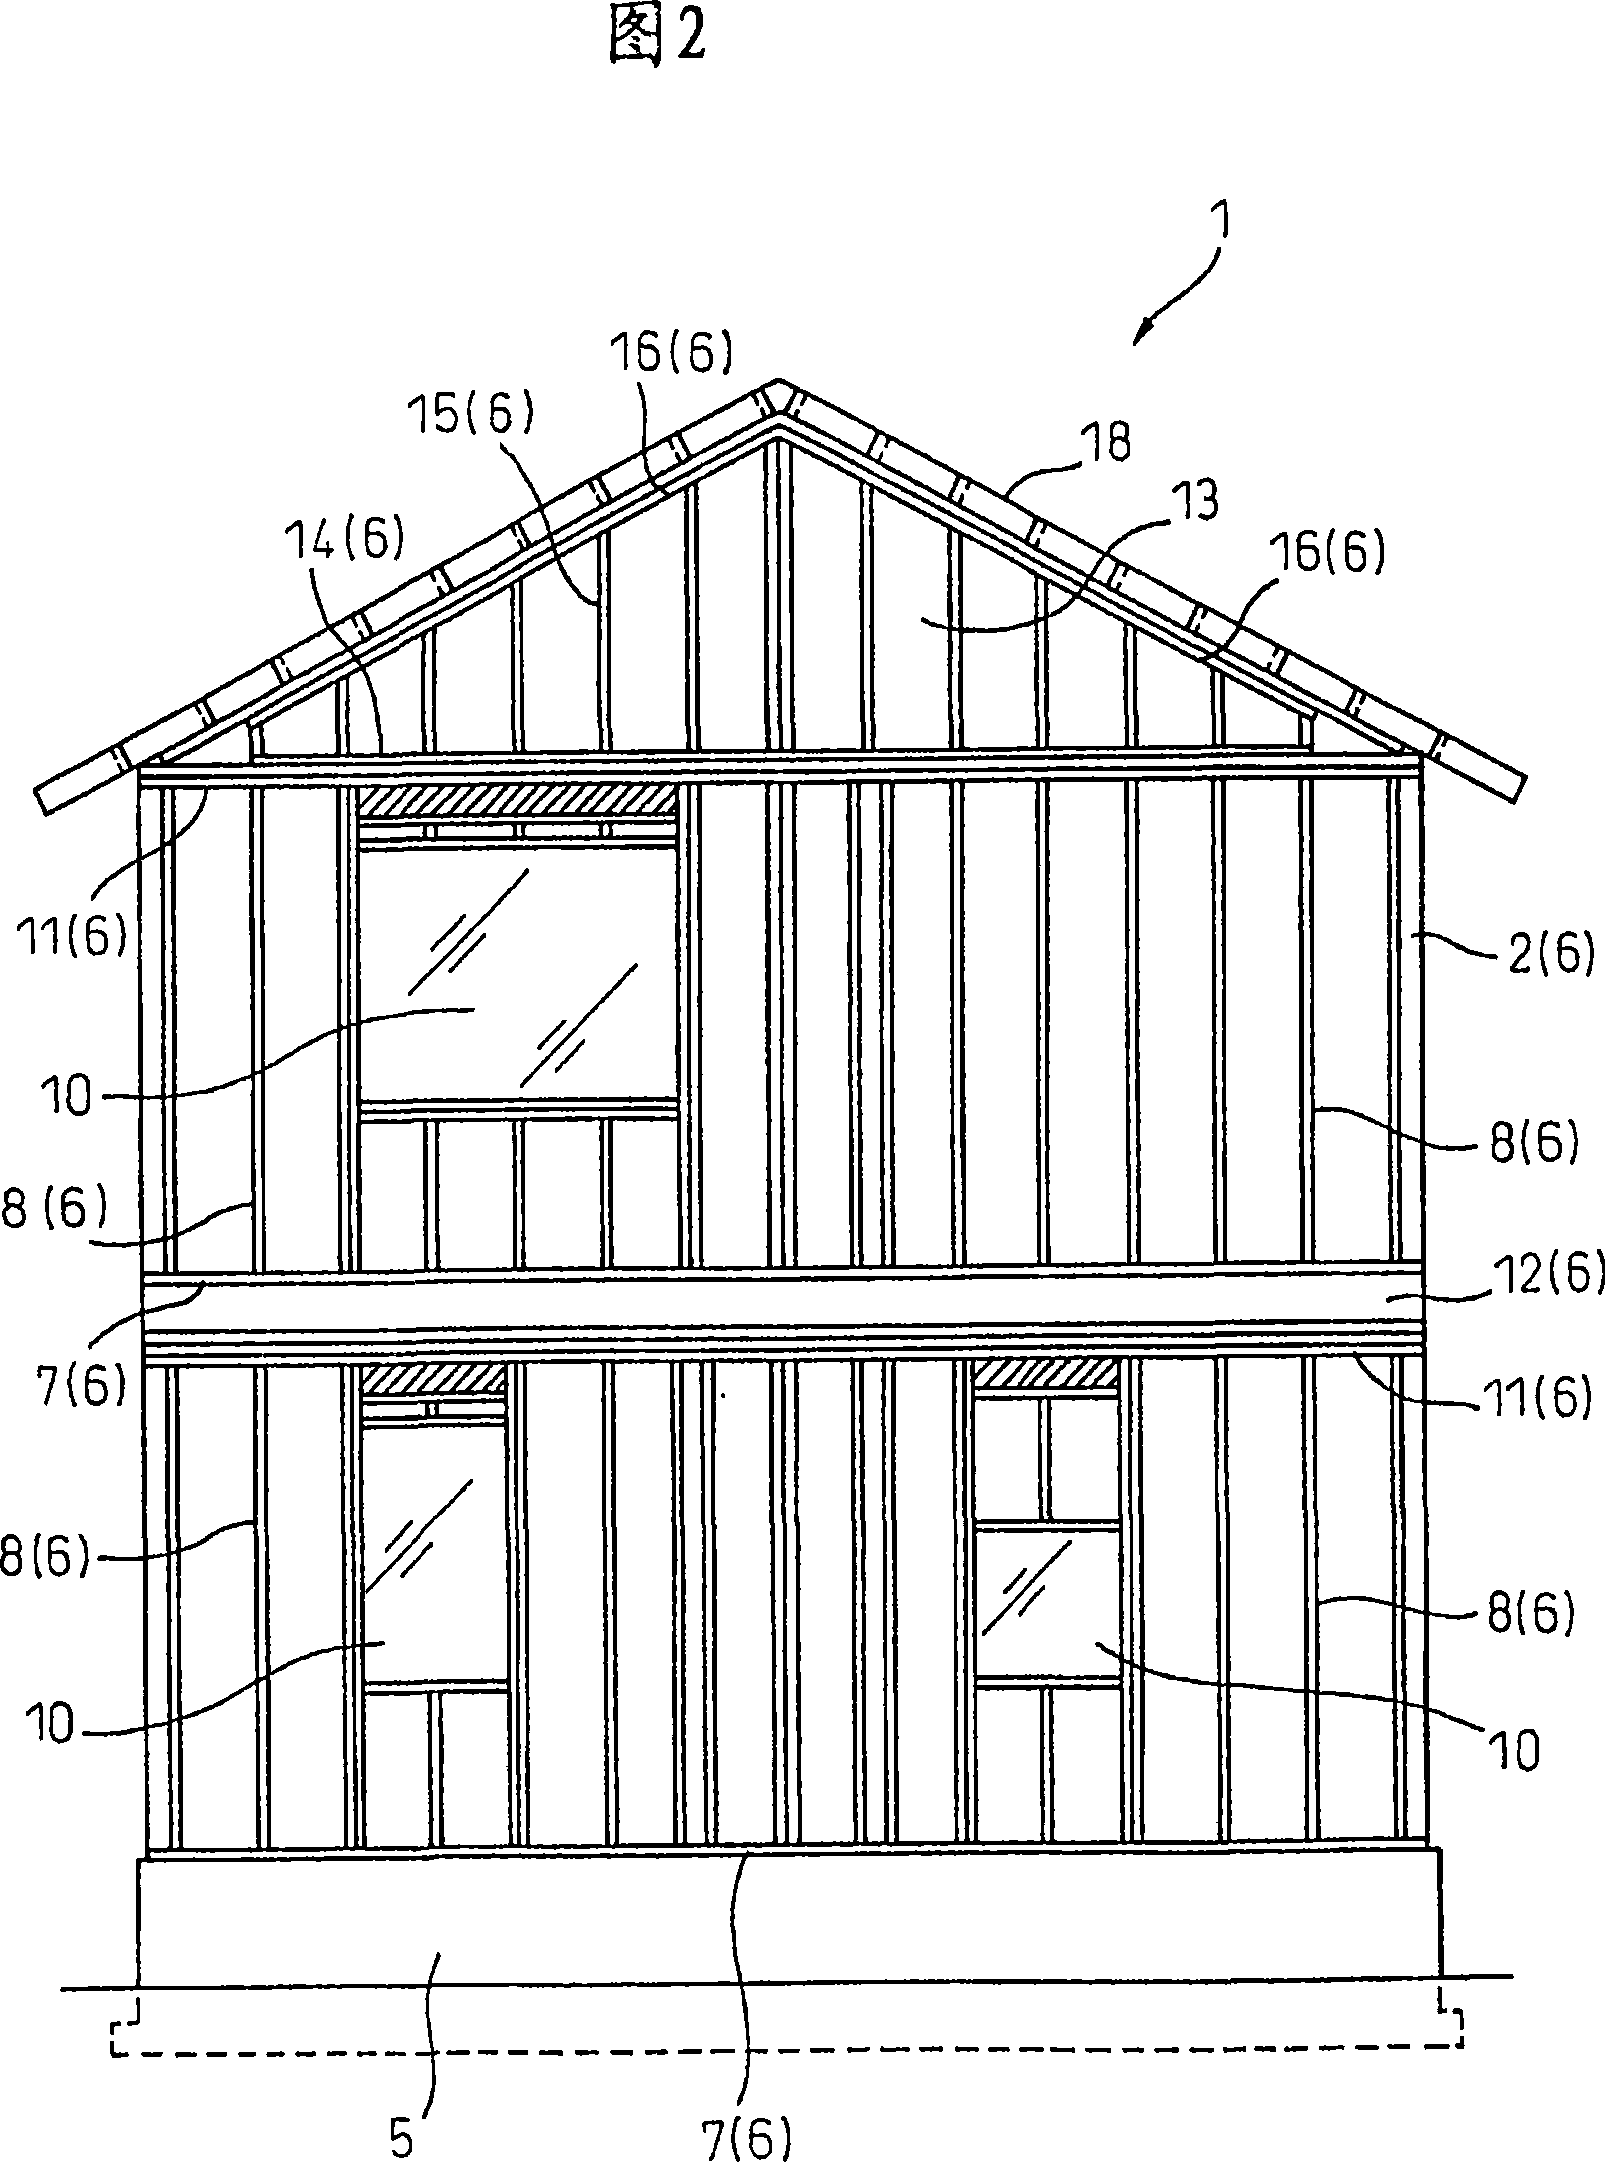 Method of constructing steel house for uniformizing hot environment therein